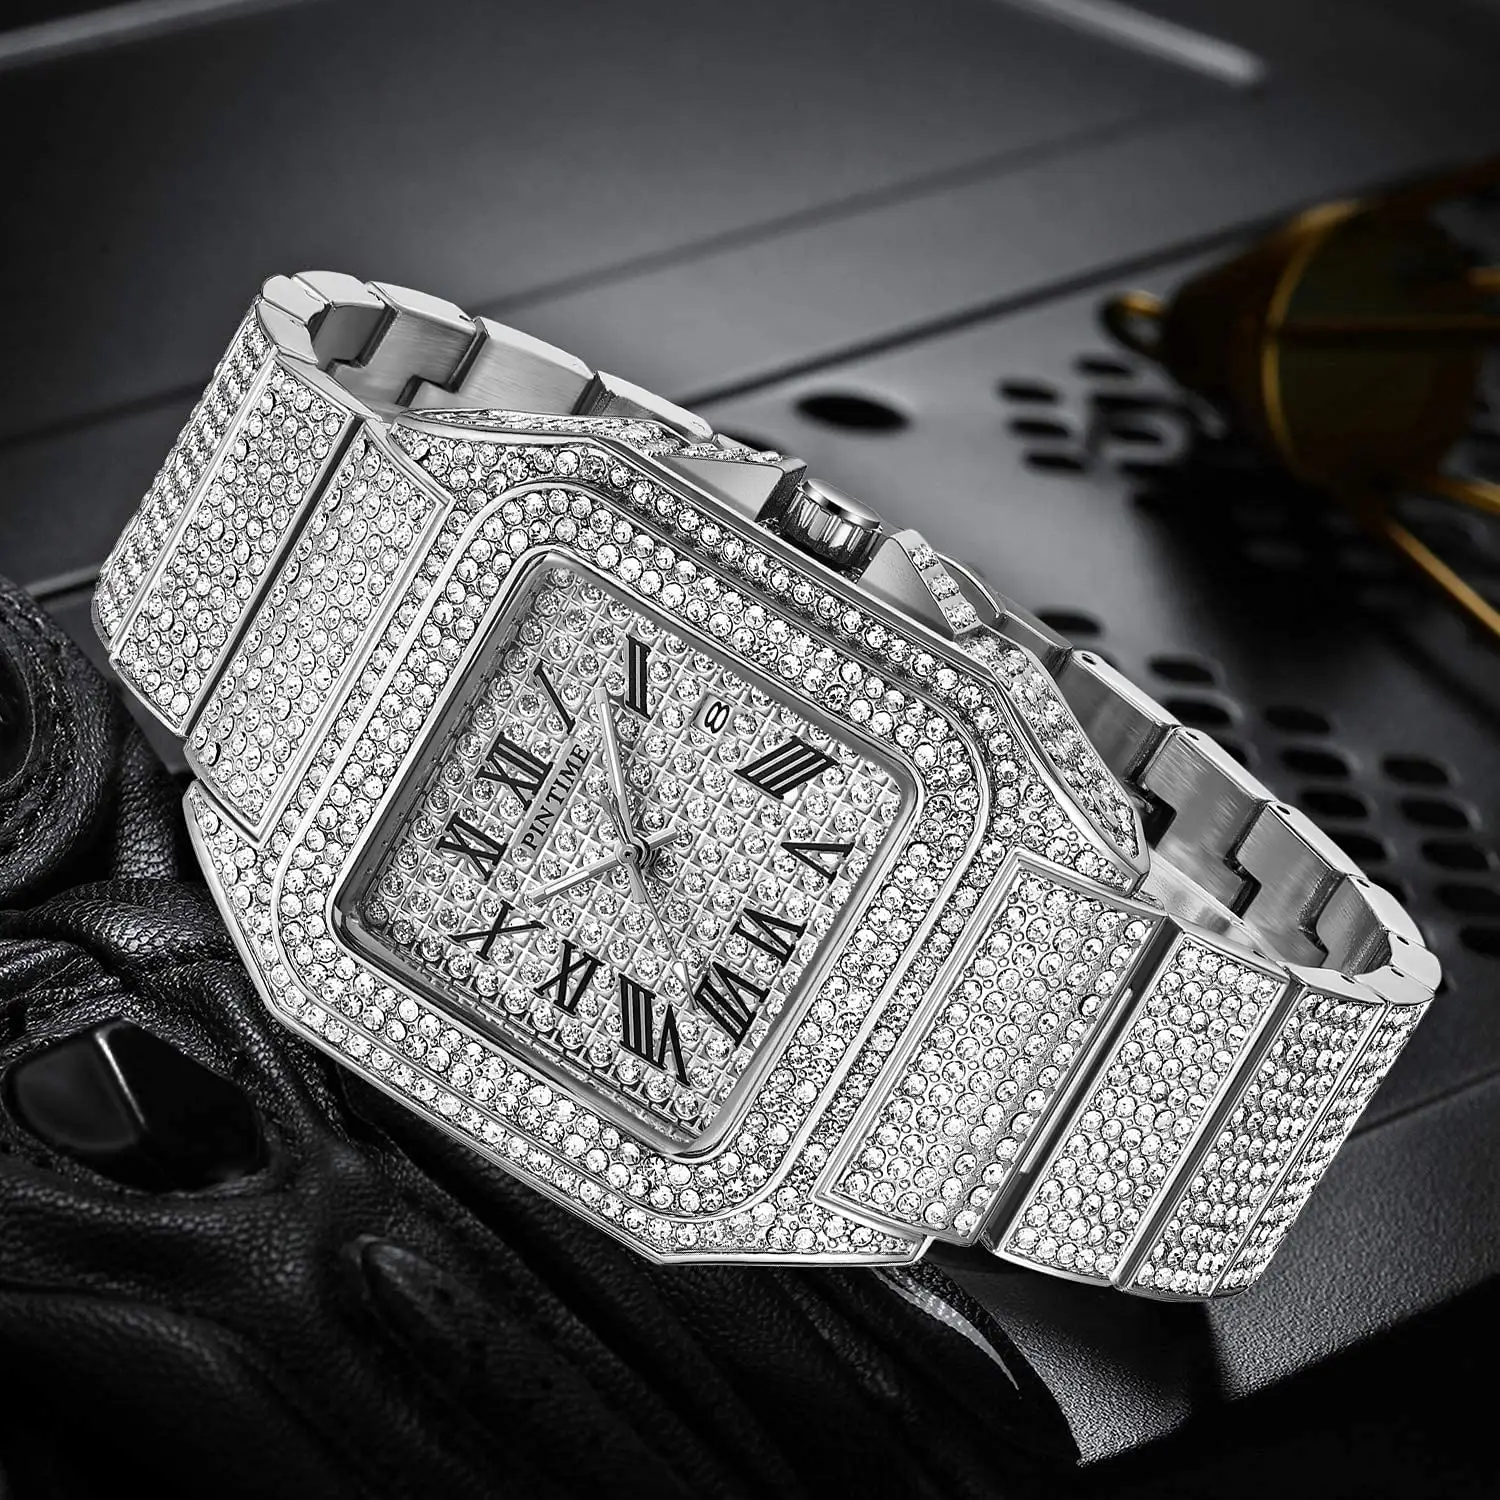 Solid White Gold watch